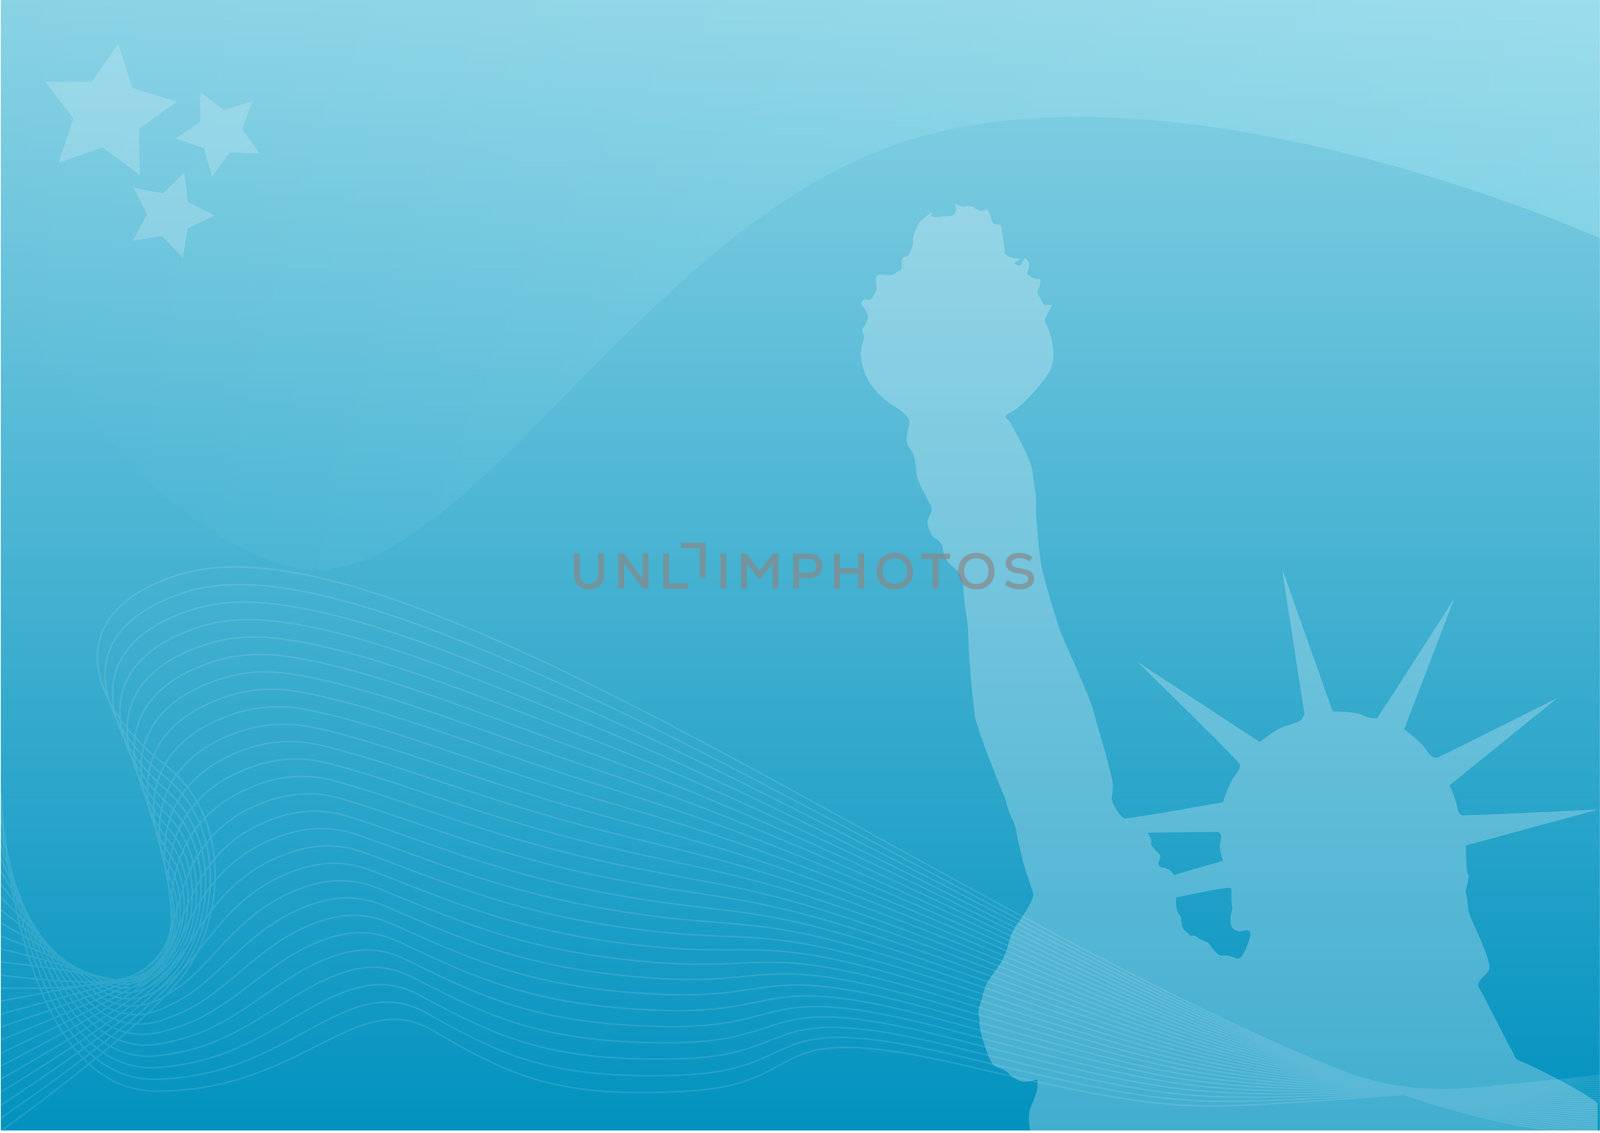 Silhouette of the statue of liberty infront of a light blue background.